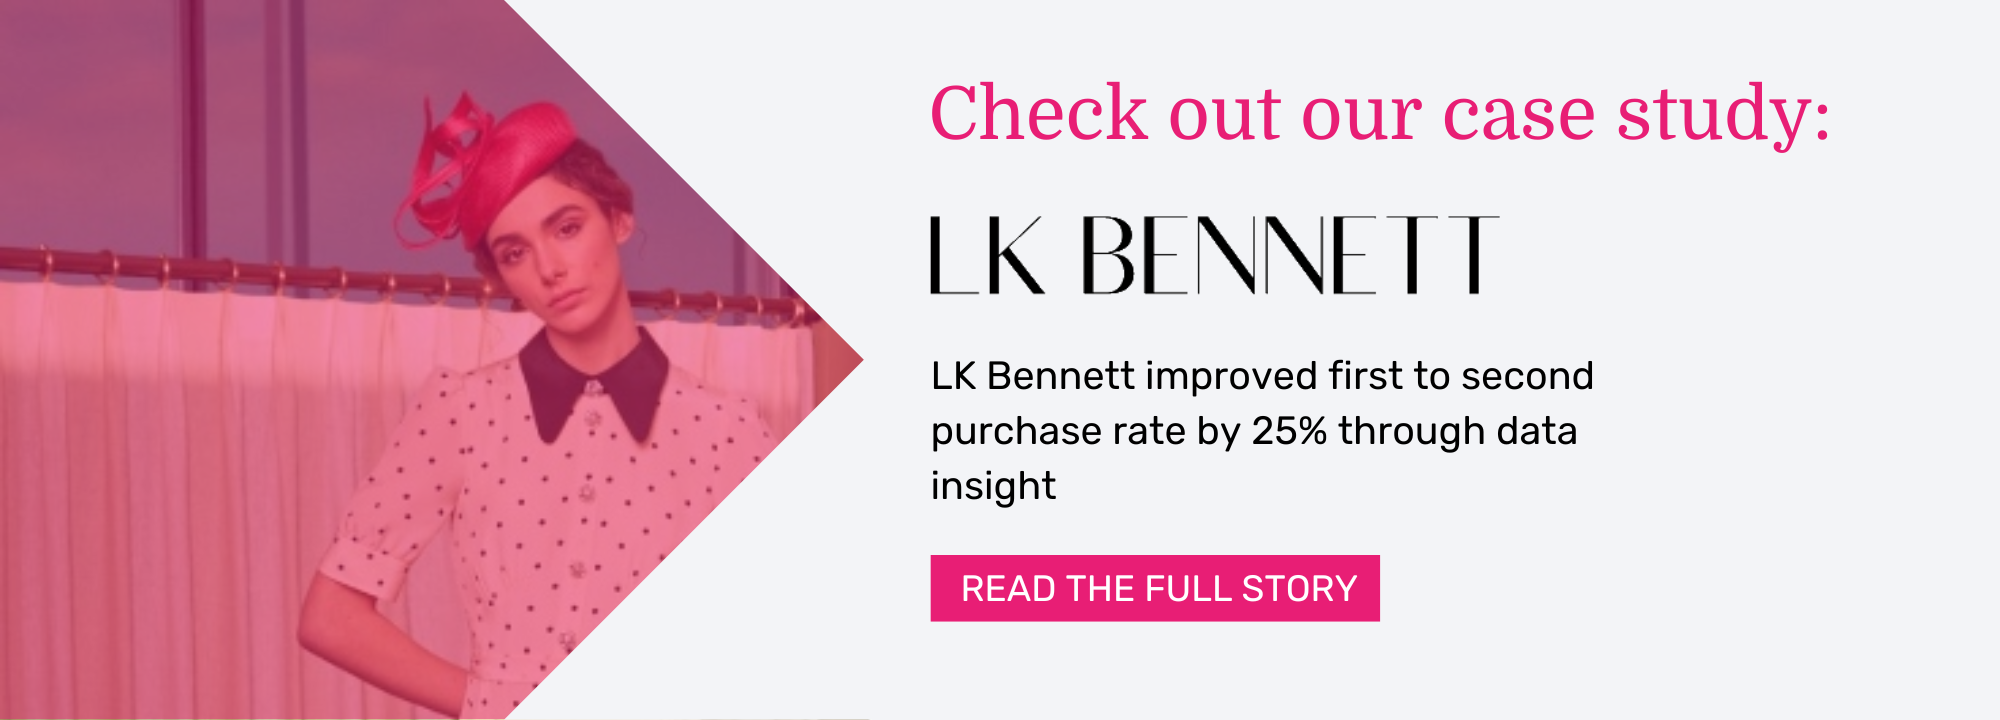 LK Bennett improved first to second purchase rate by 25% through data insight